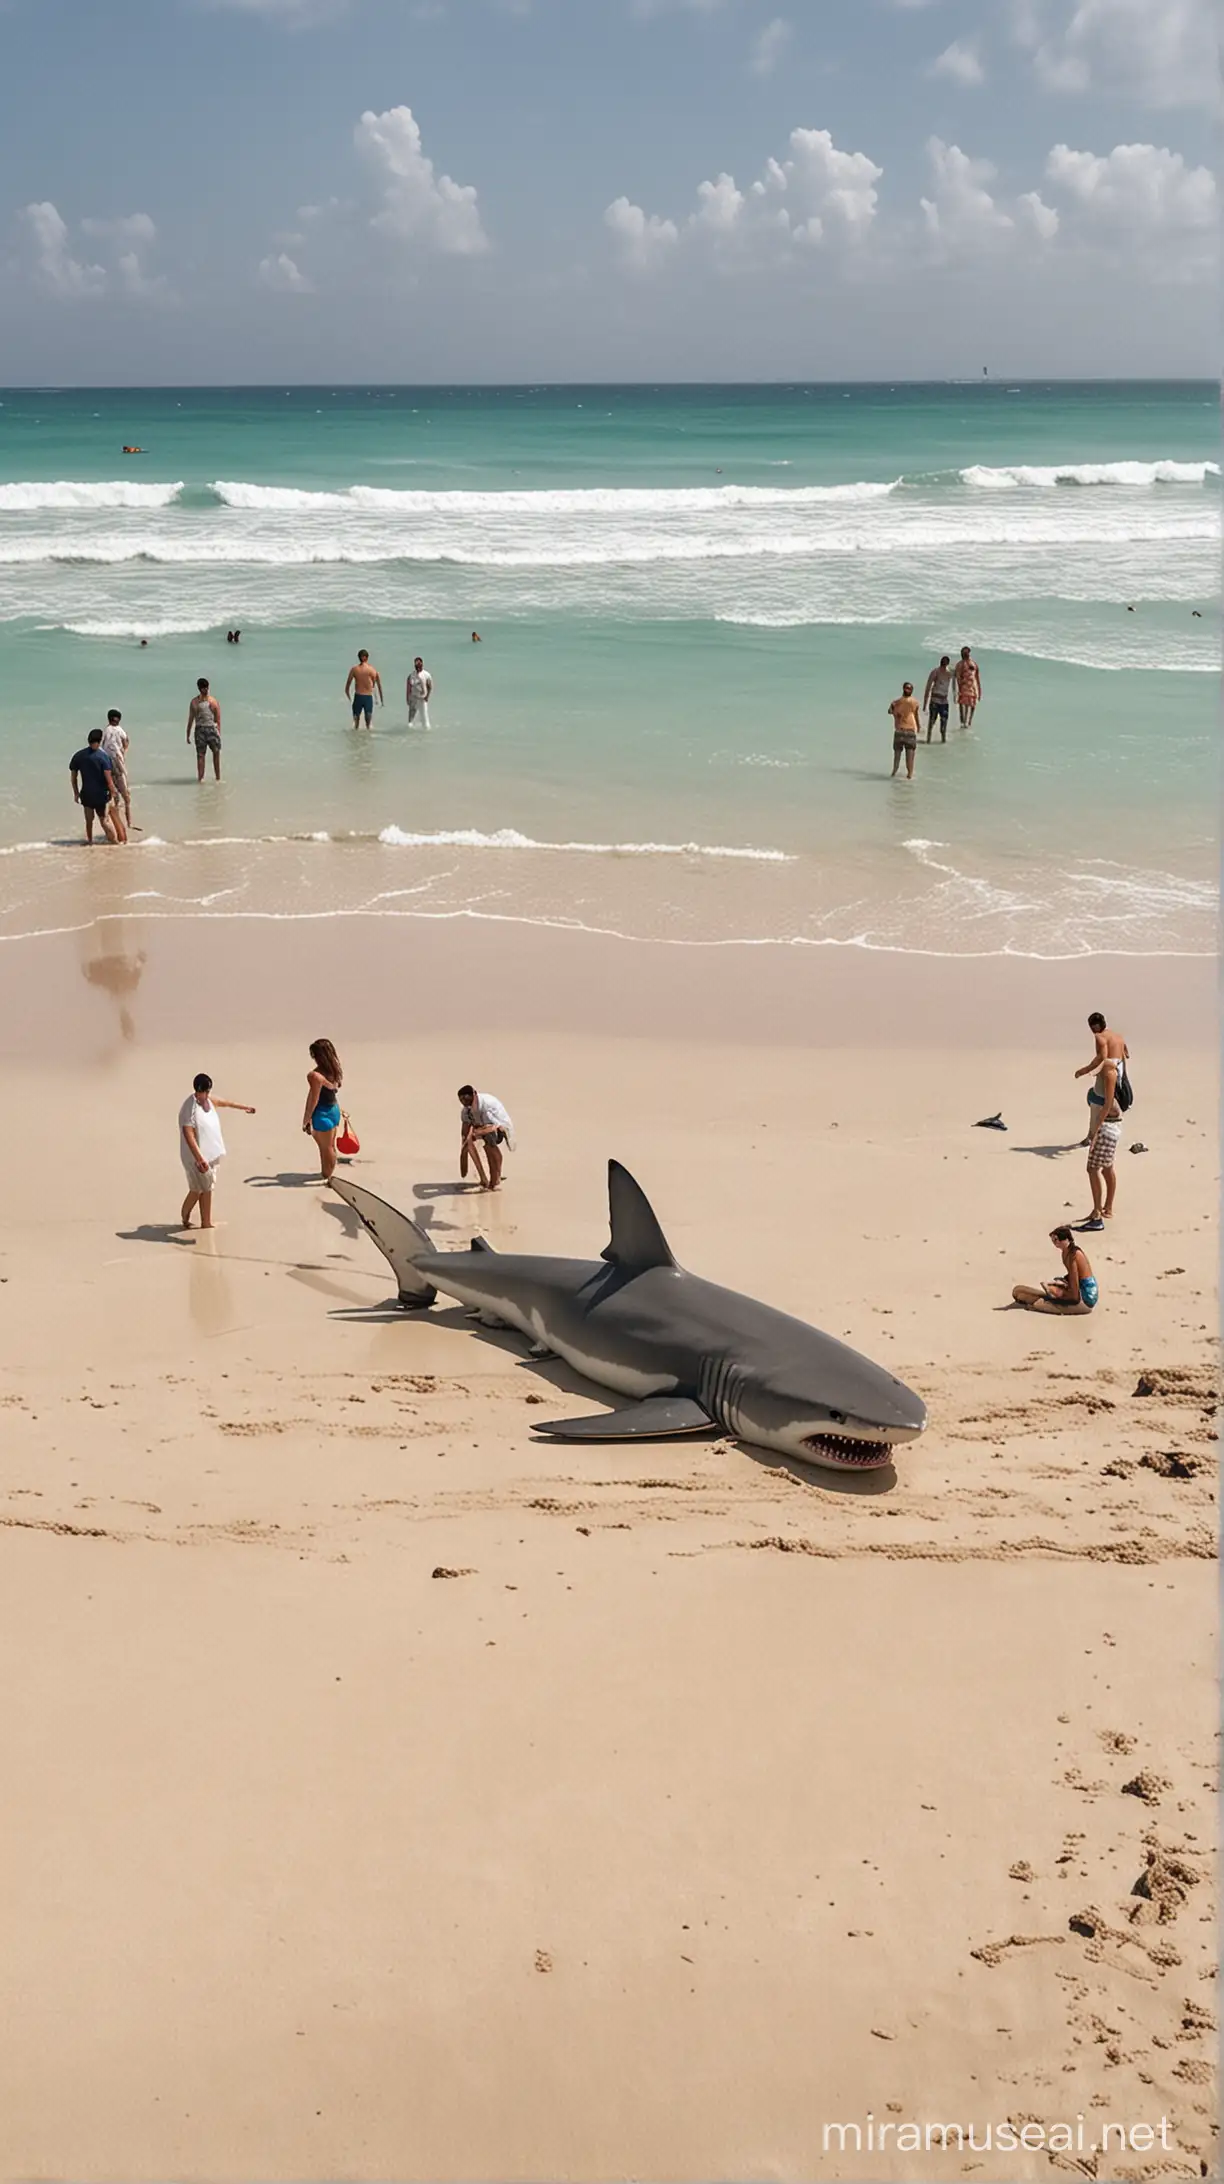 shark stranded on the beach, many people, seen from near